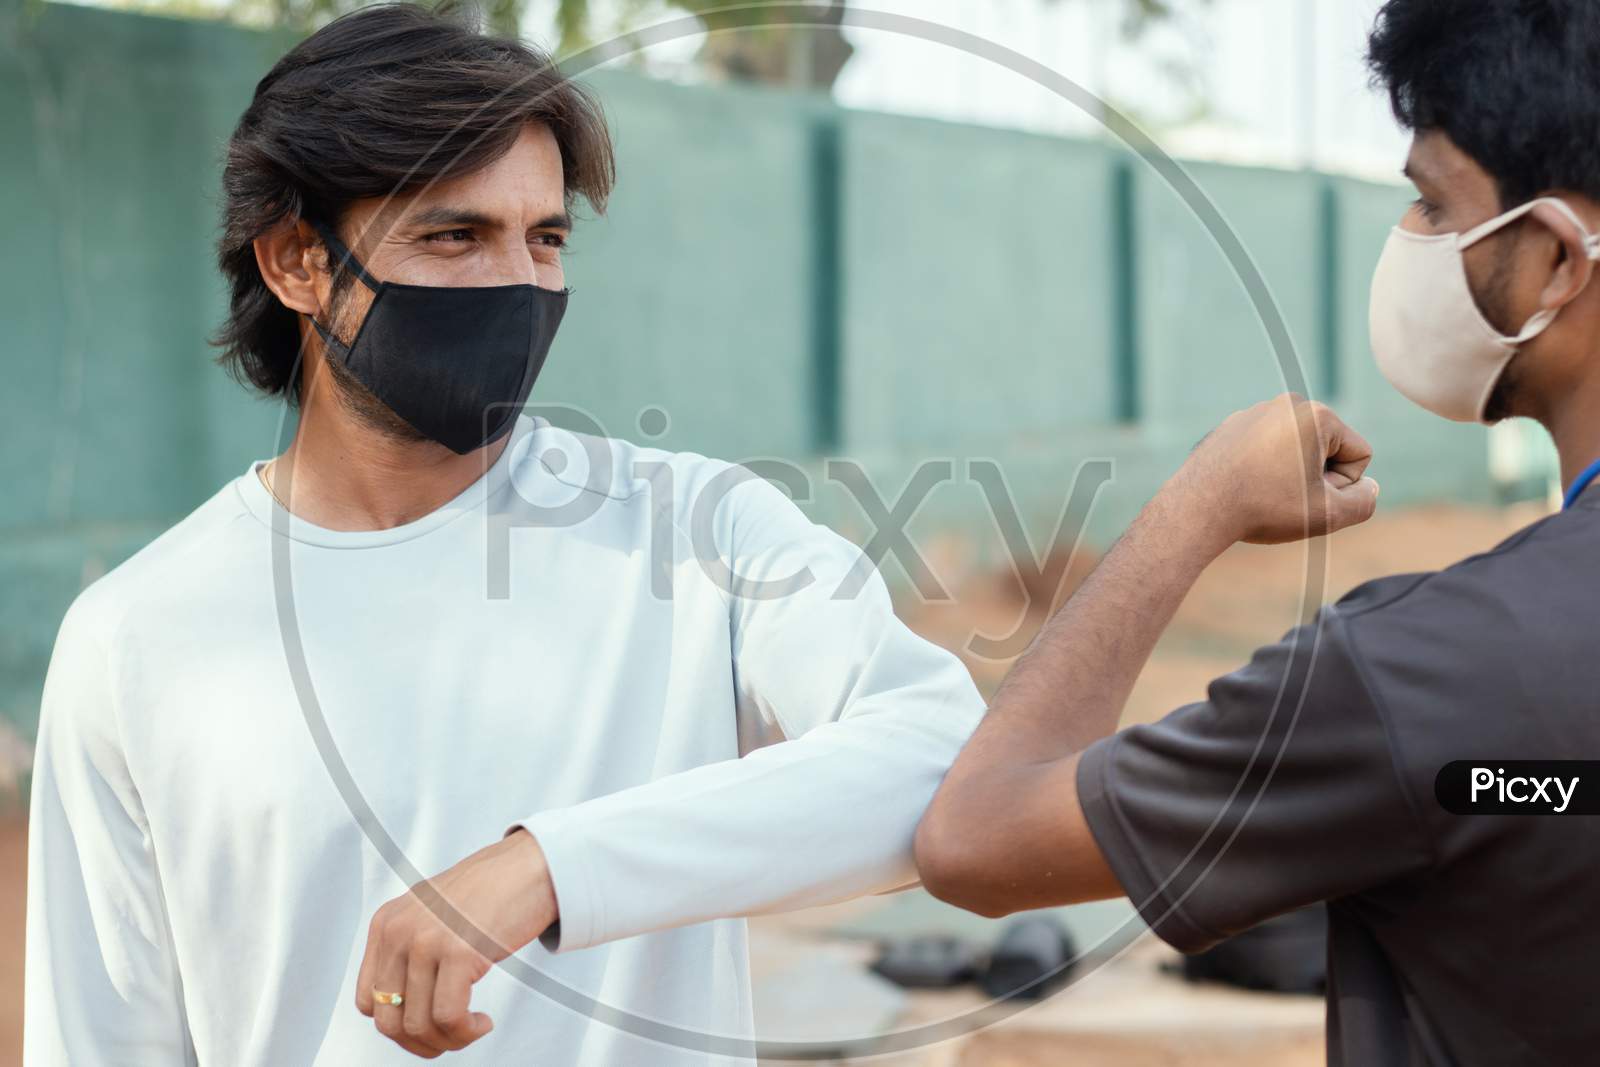 Young Indian man with a Black mask on face